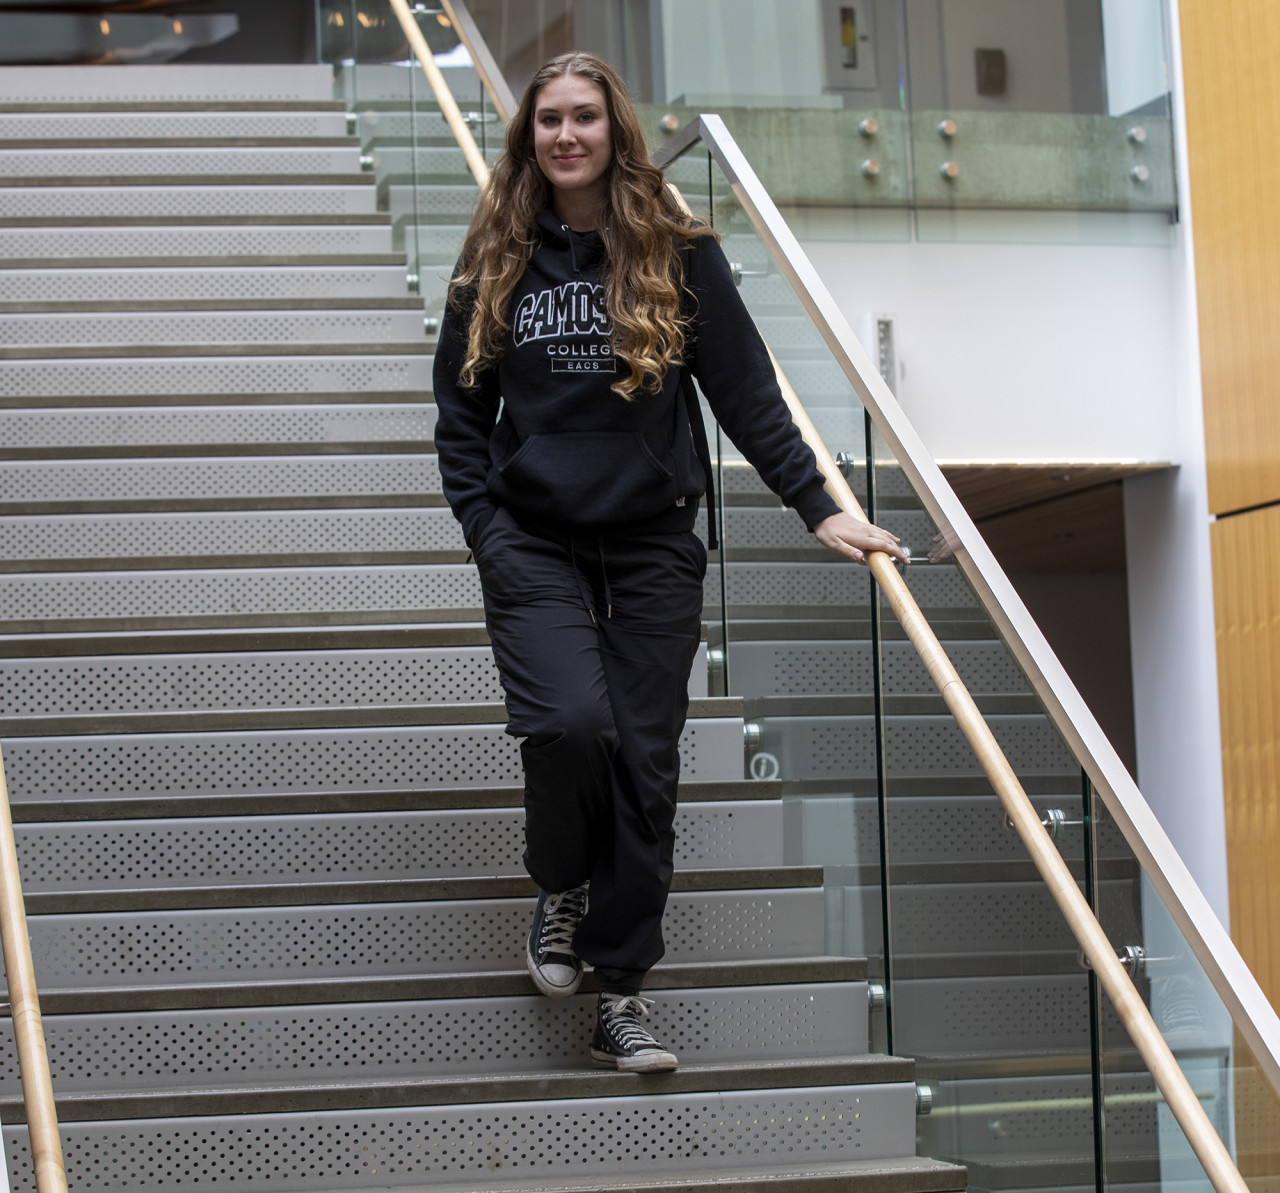 Olivia Van Bruggen - Student walking down stairs - Community Support and Education Assistant program